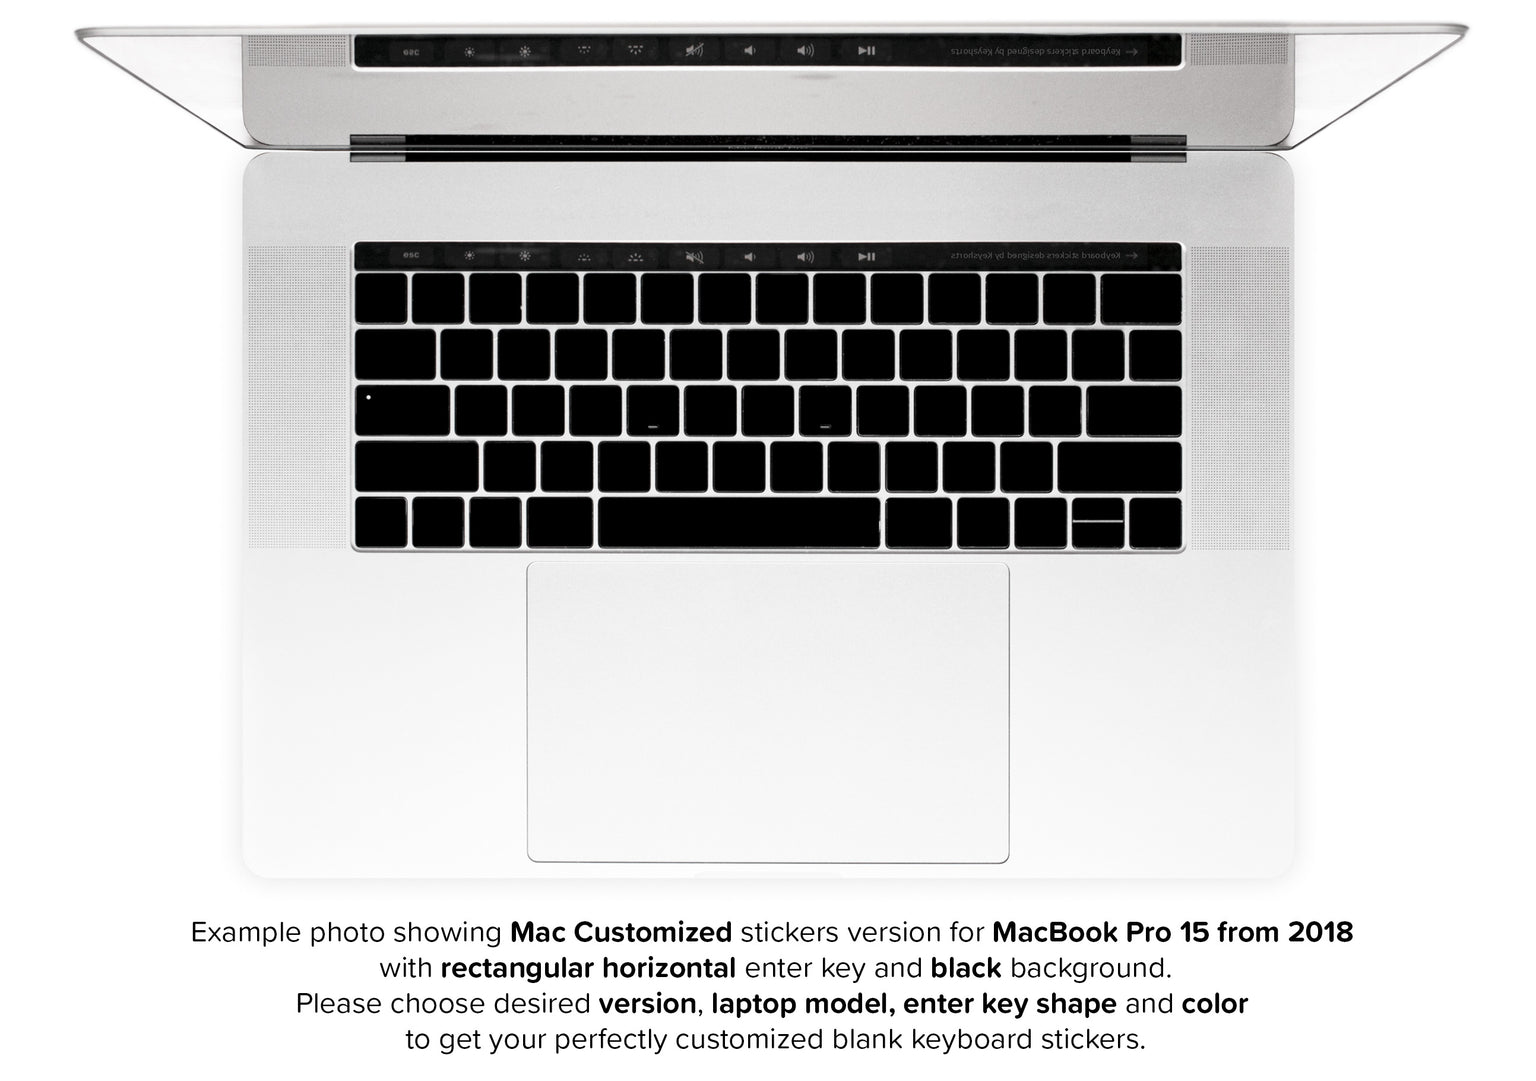 Blank MacBook Keyboard Stickers with no captions